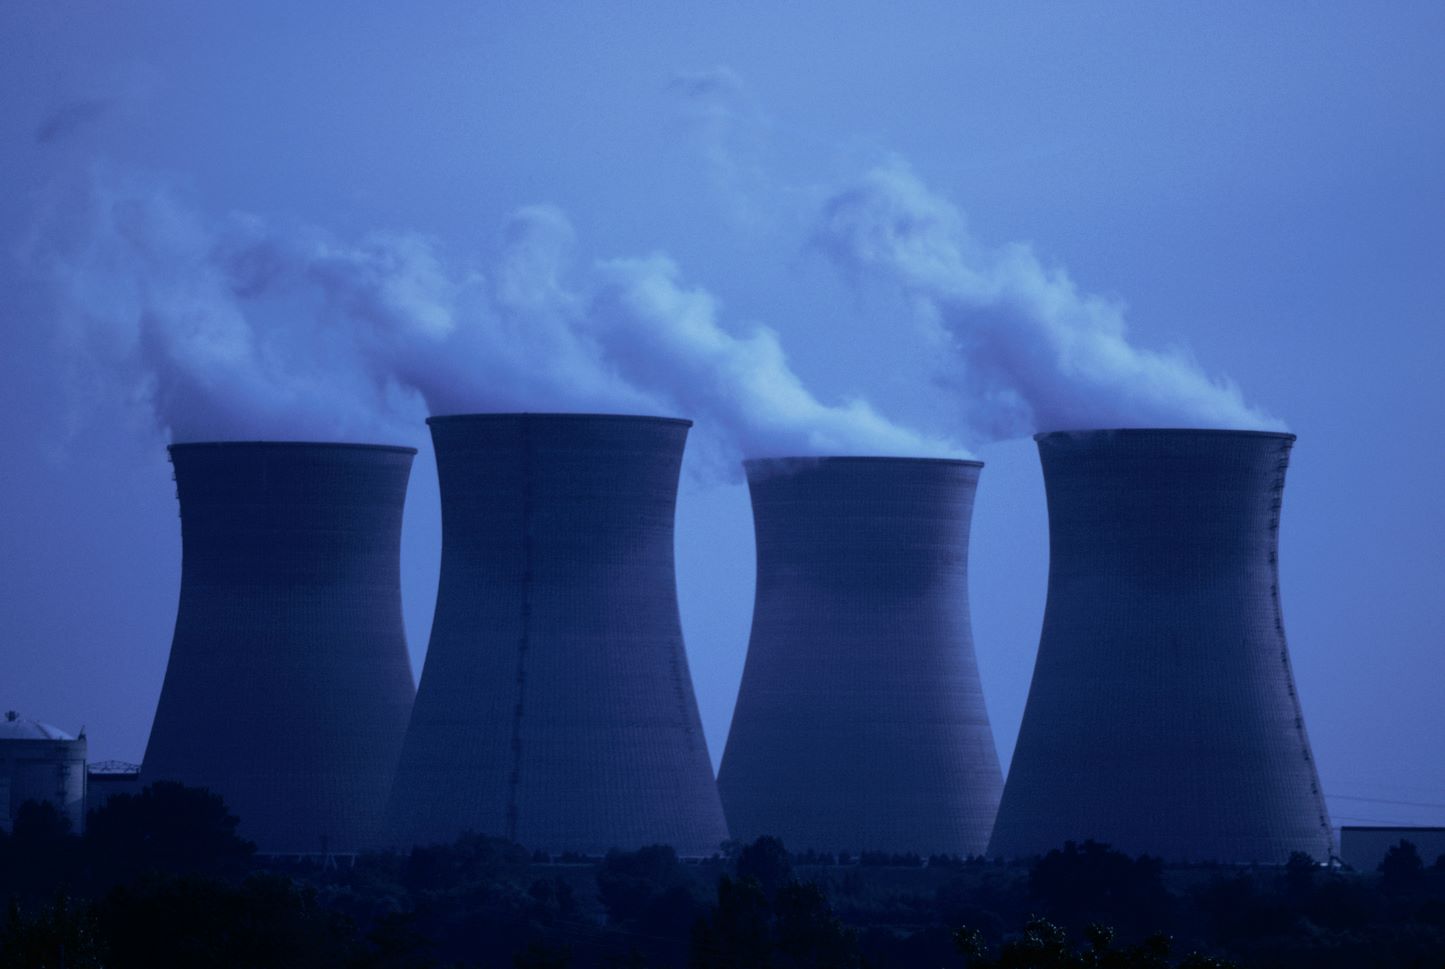 Climate crisis and international commitments require us to change the energy system, and nuclear power is heating the debate